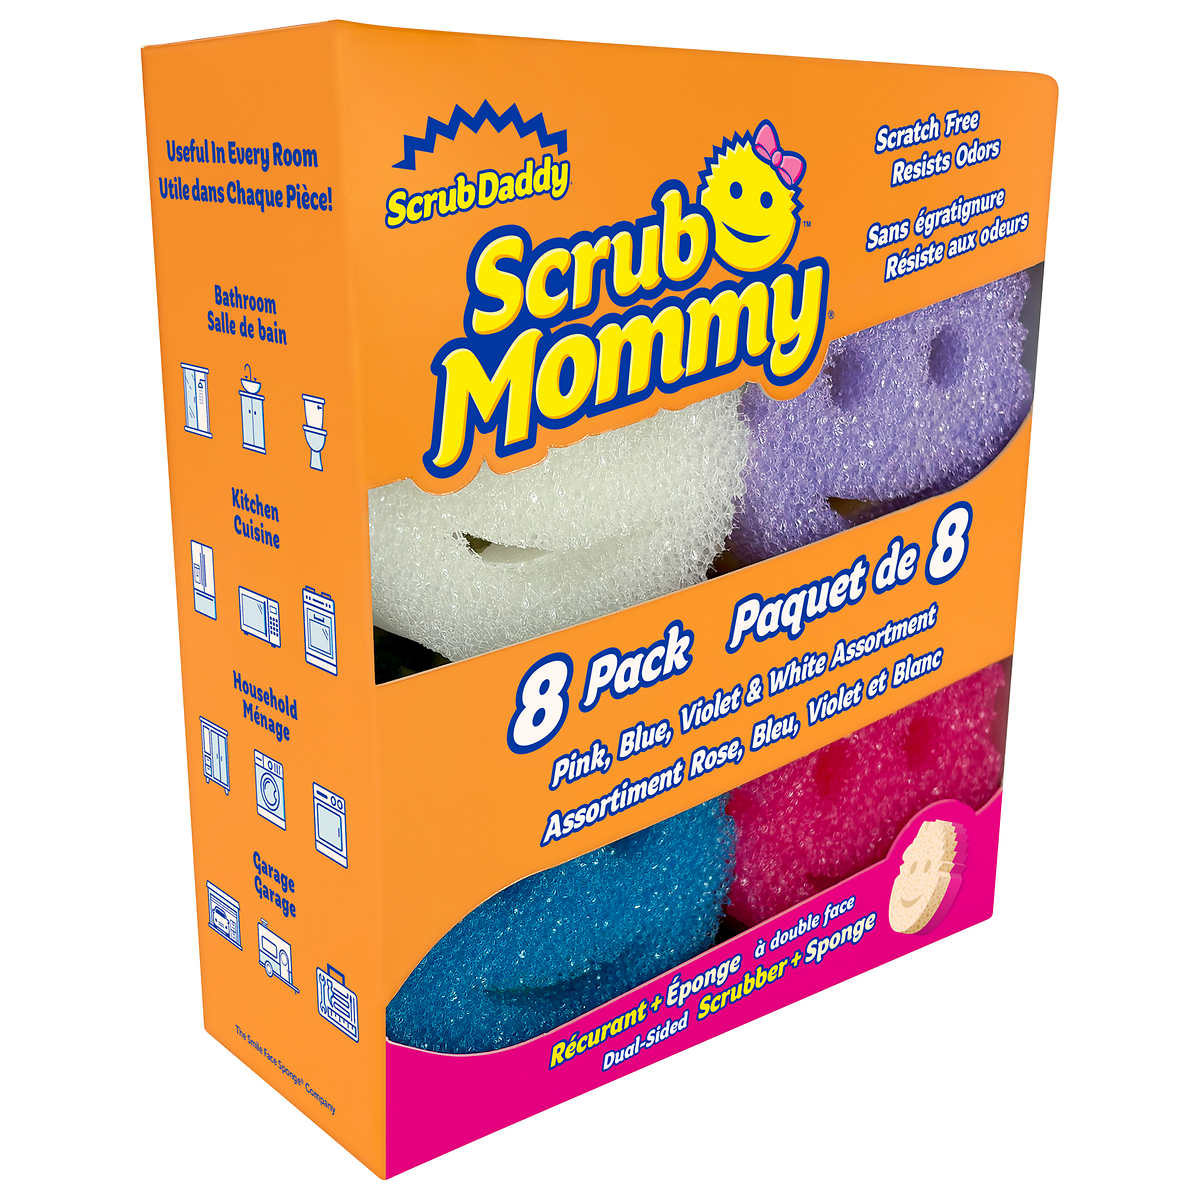 scrub-daddy-paquet-8-tampons-récurer-scrub-mommy-scrubbers-pack-2